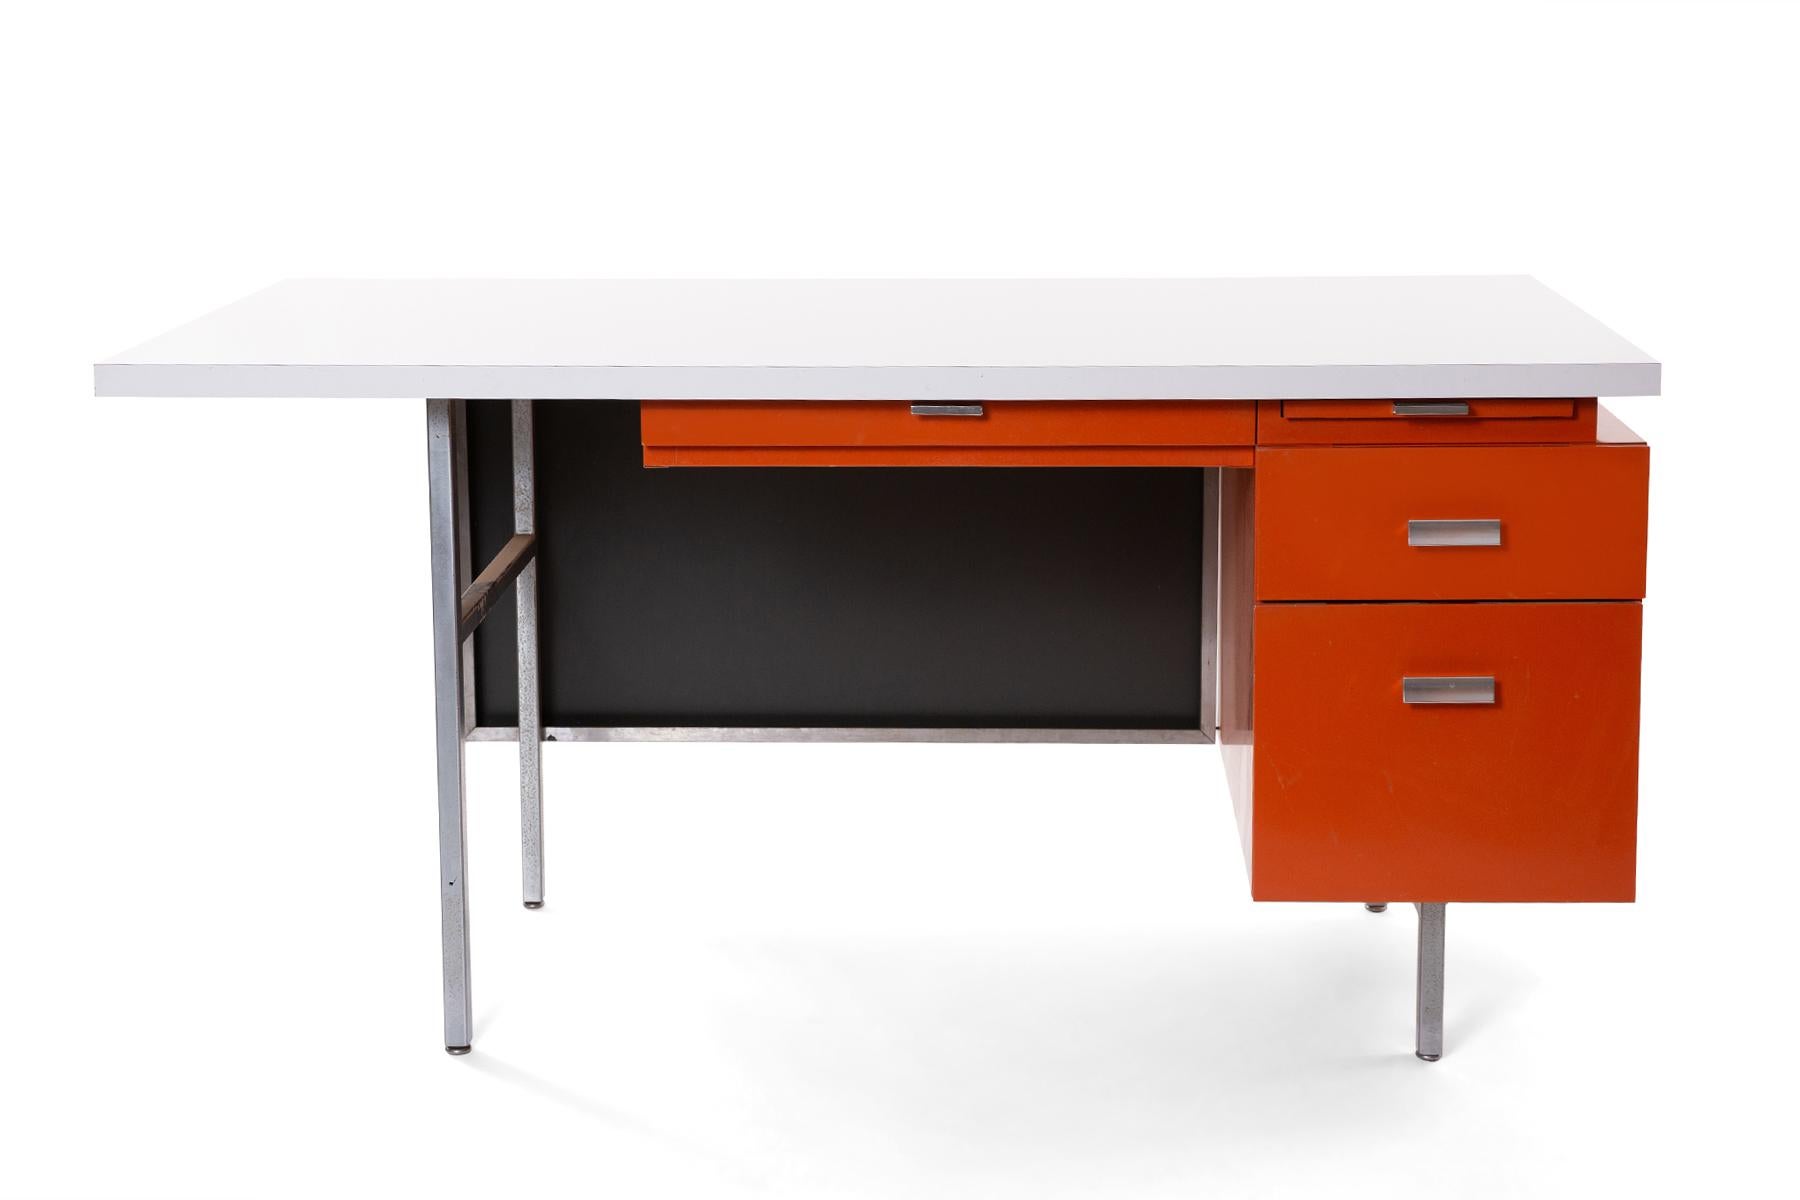 George Nelson for Herman Miller desk and credenza or return circa early 1960s. These all original seldom seen examples have orange drawer fronts with inset metal pulls, steel legs and white formica tops. The desk has a wicker privacy screen as well.